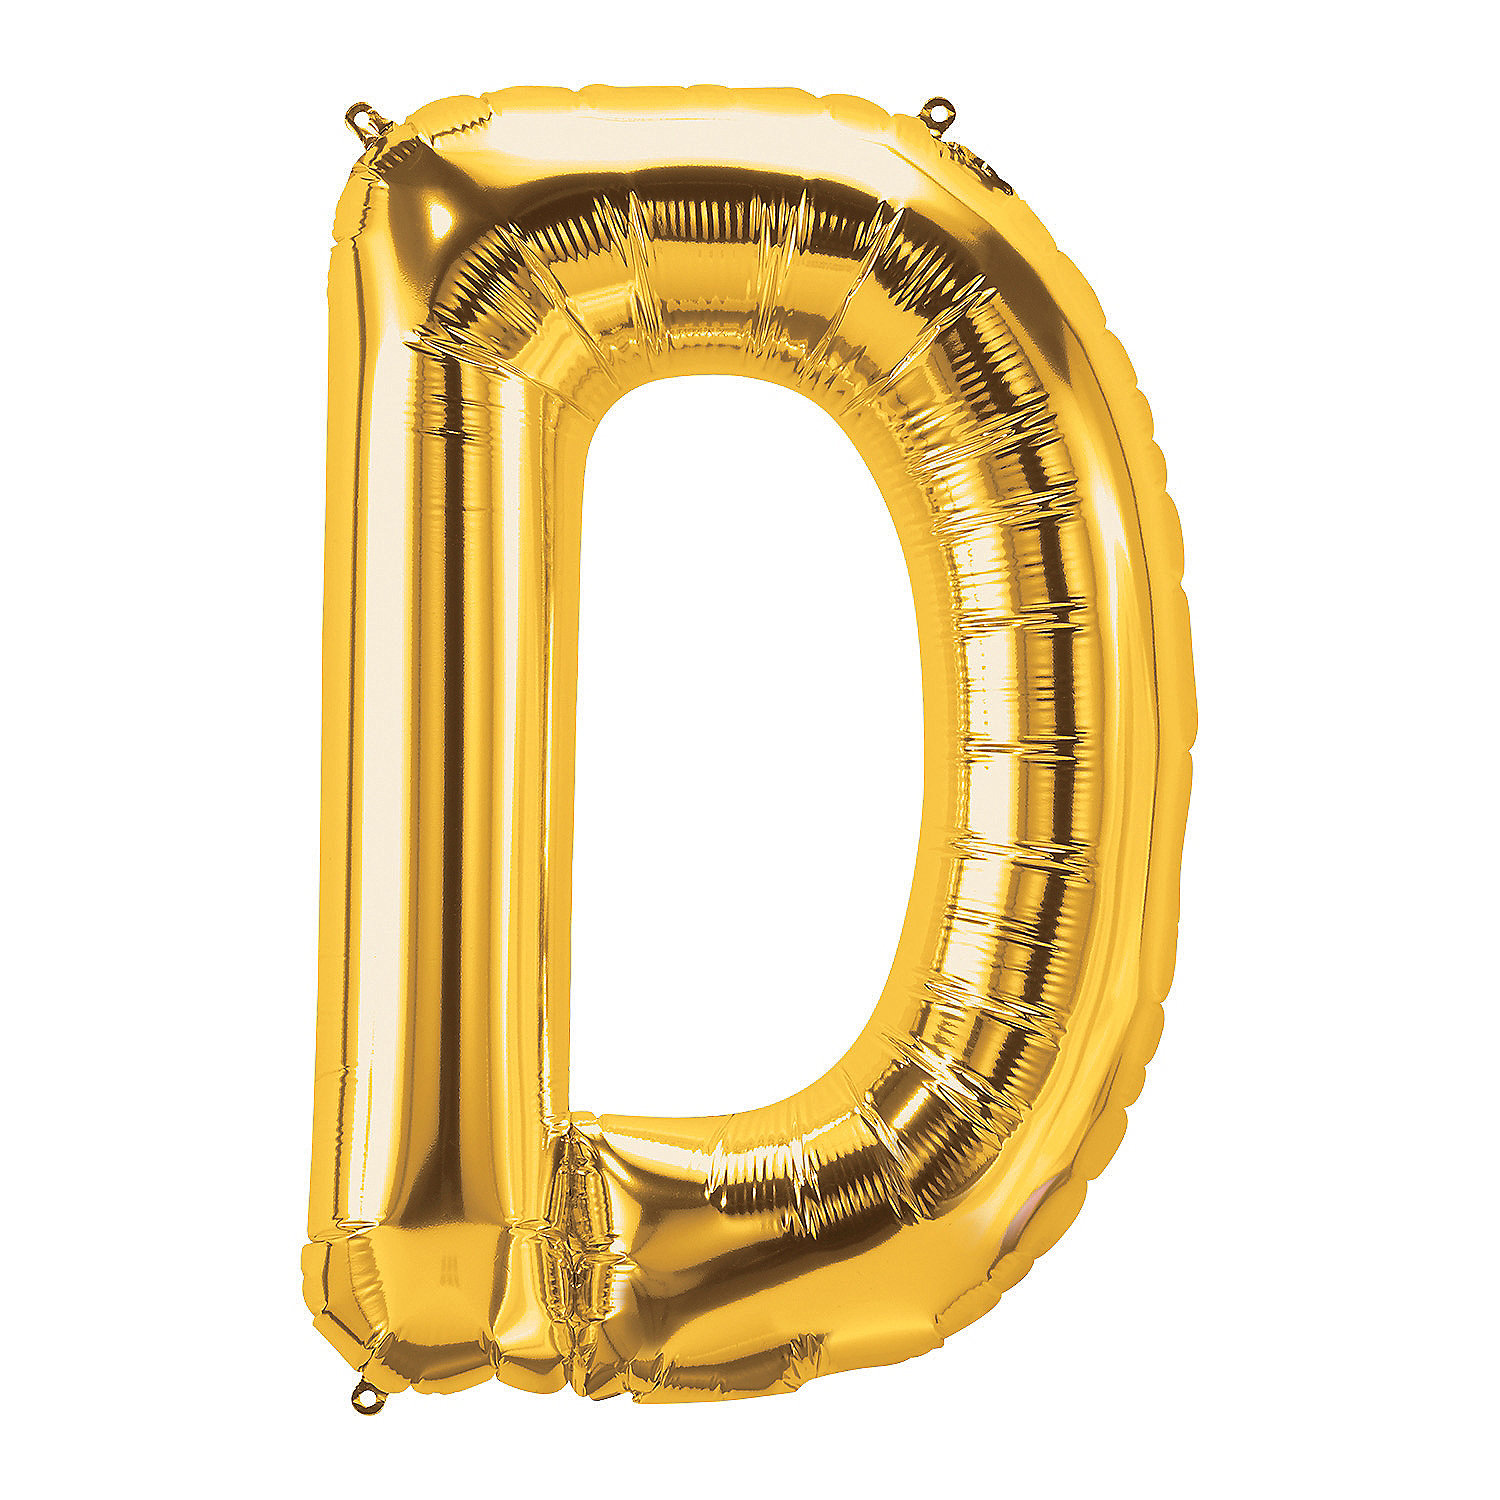 D Shaped Gold Mylar Balloon 34In - Party Decor - 1 Piece | eBay